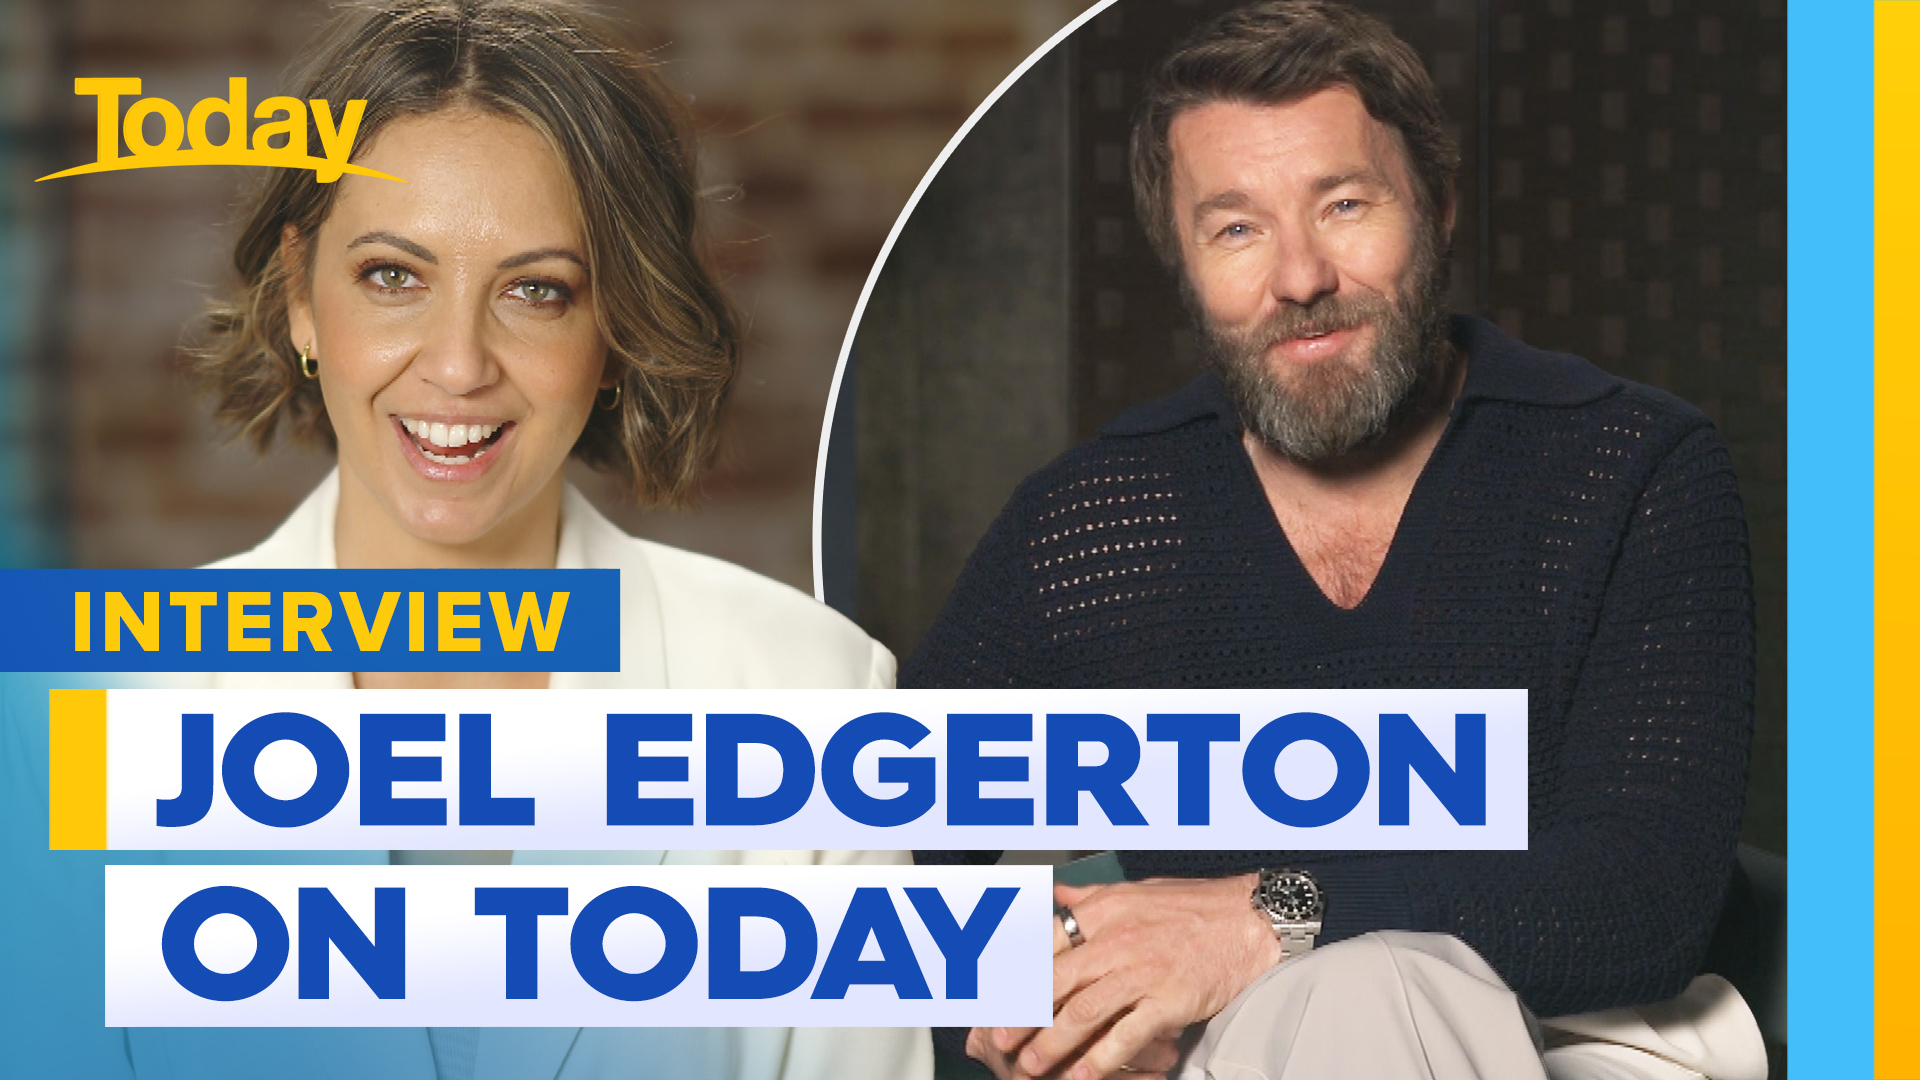 Joel Edgerton catches up with Today